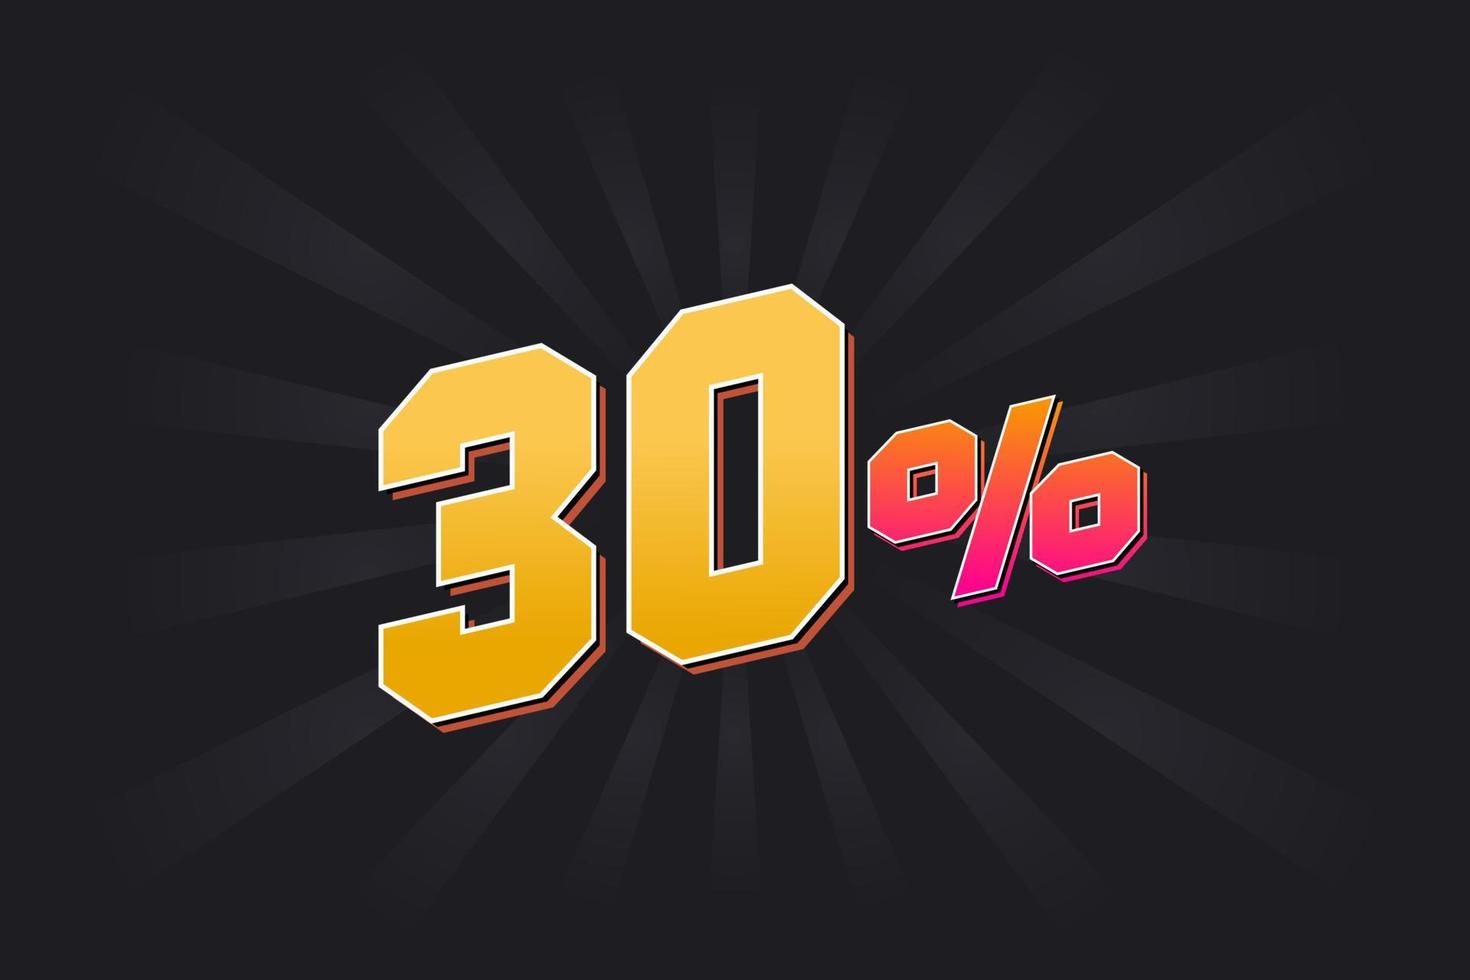 30 discount banner with dark background and yellow text. 30 percent sales promotional design. vector